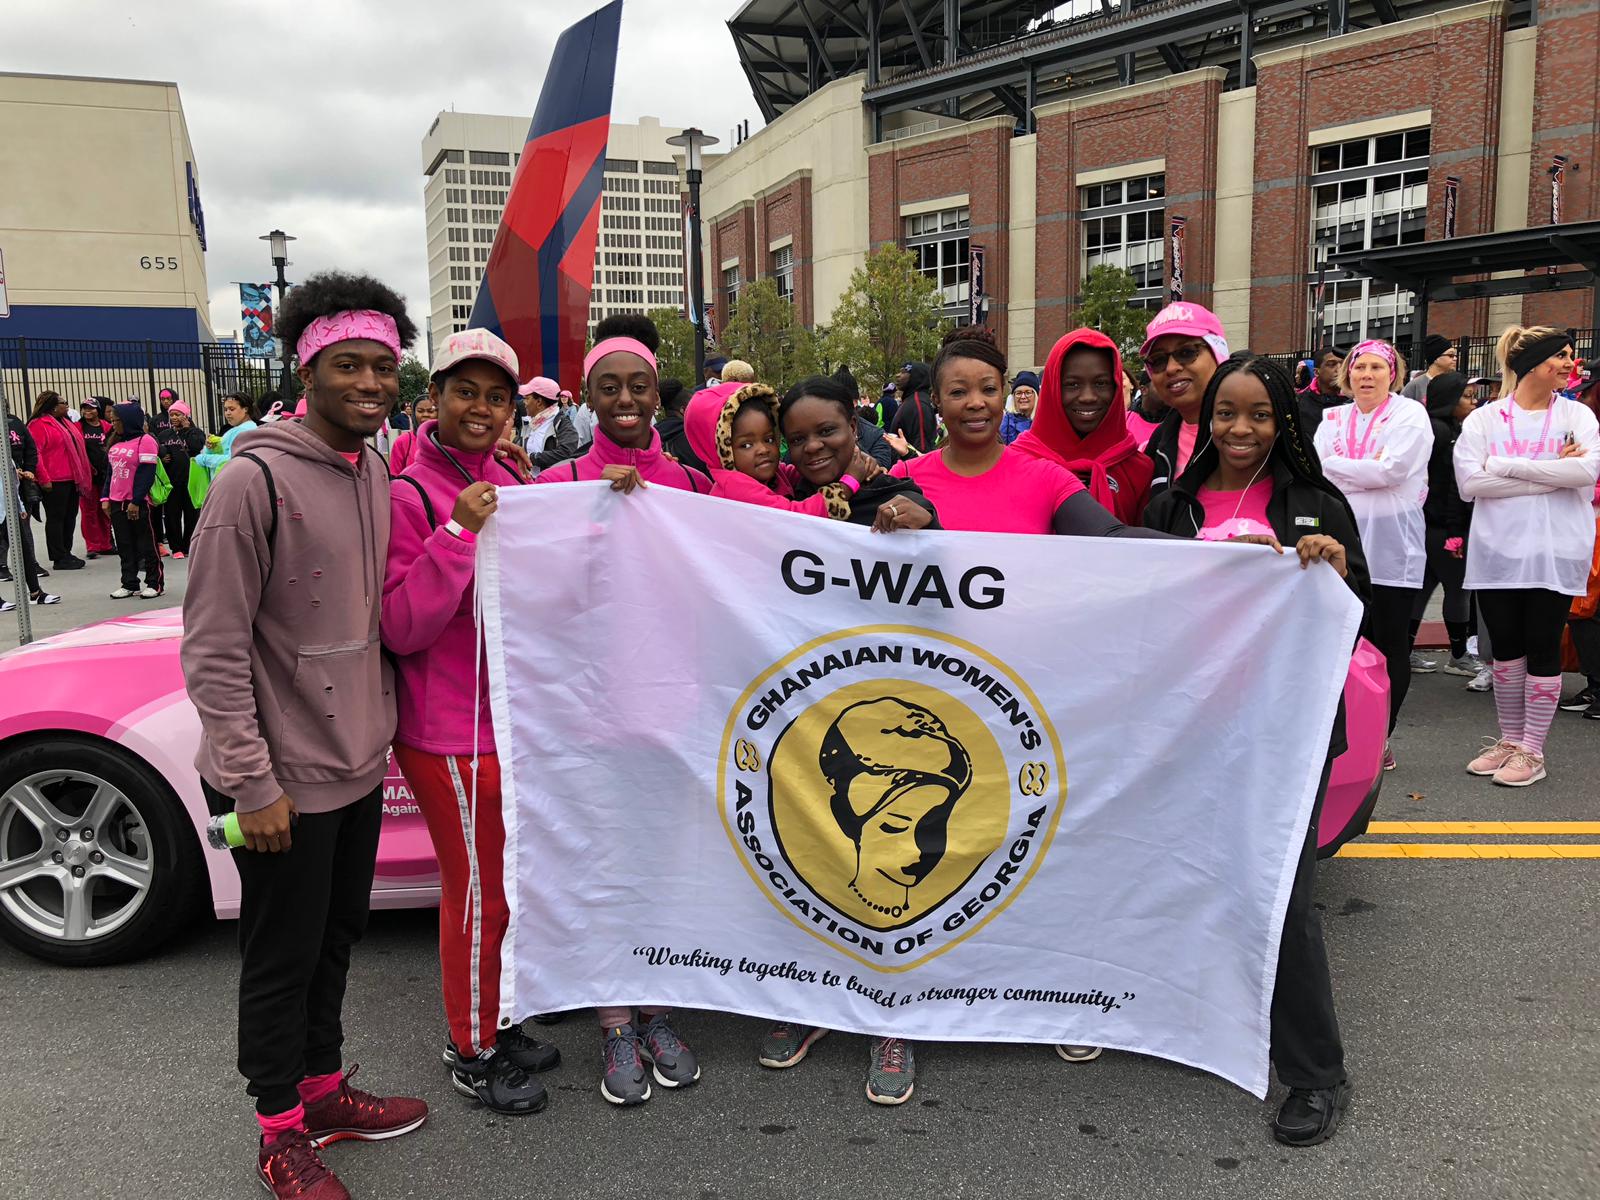 GWAG Walks With Strides Against Breast Cancer In Honor of Breast Cancer Awareness Month